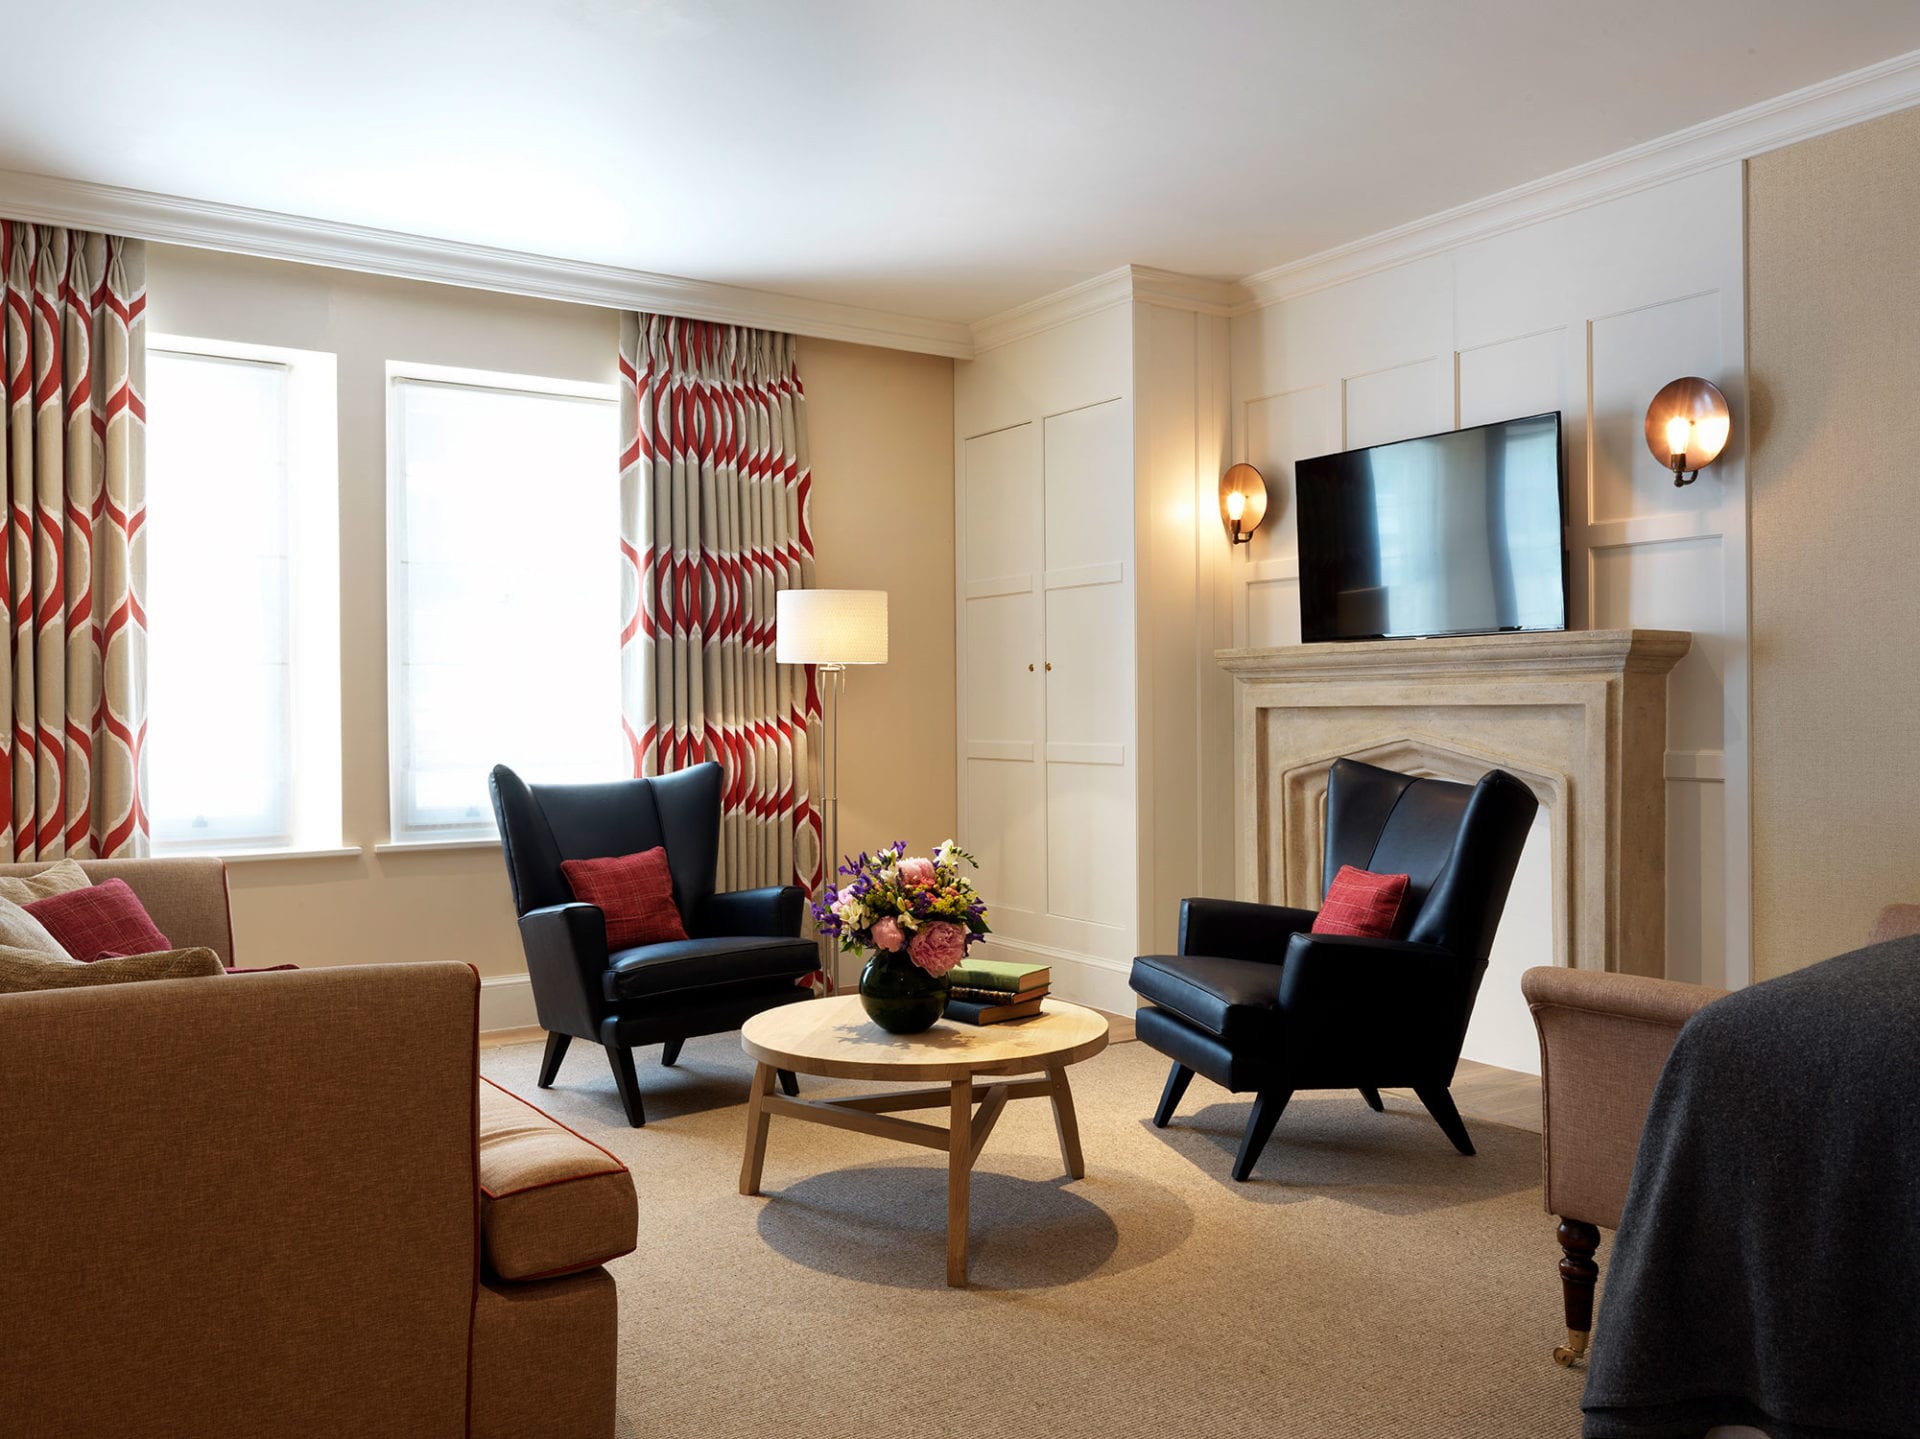 Lounge area in the Gatehouse Two bedroom suite at the Stafford London Hotel